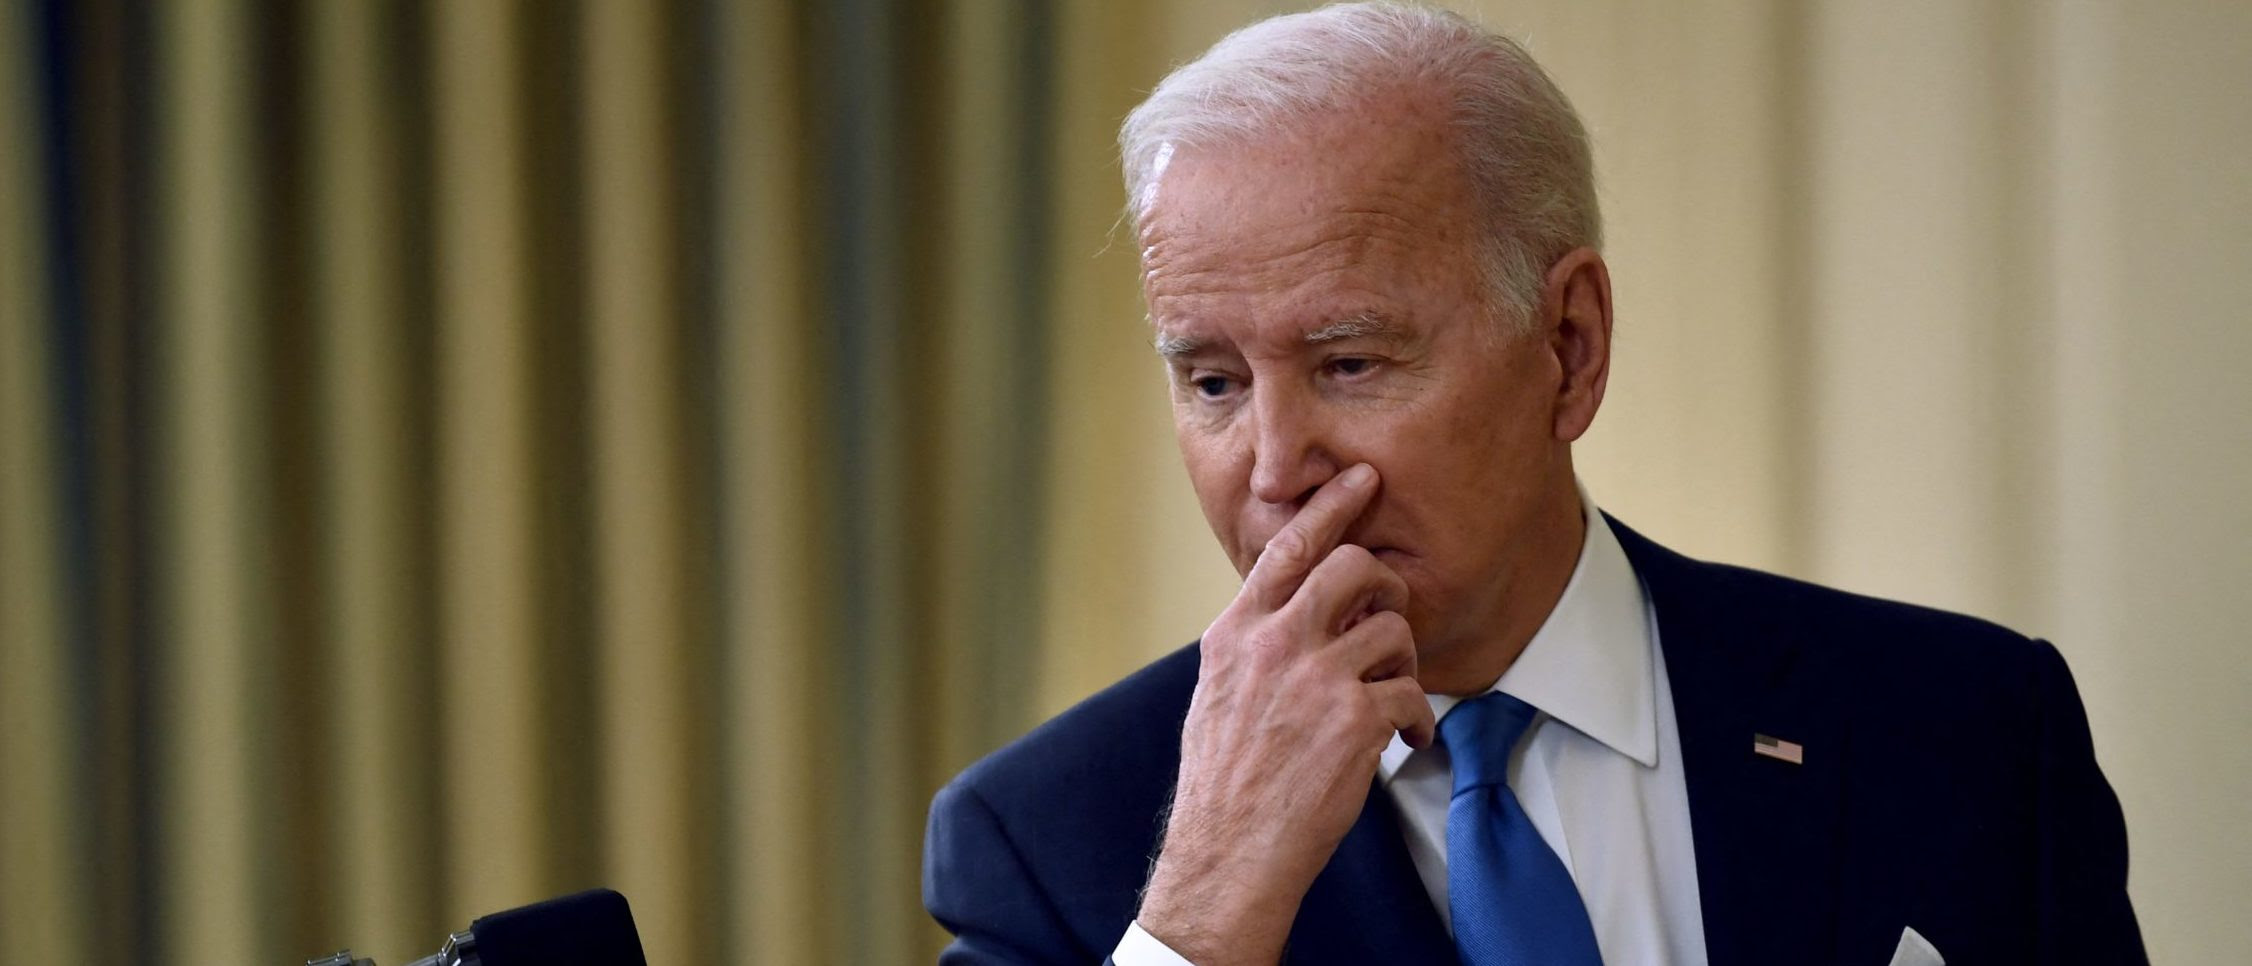 Biden Administration Green-Lights Multiple Solar Projects To Power 274,000 Homes